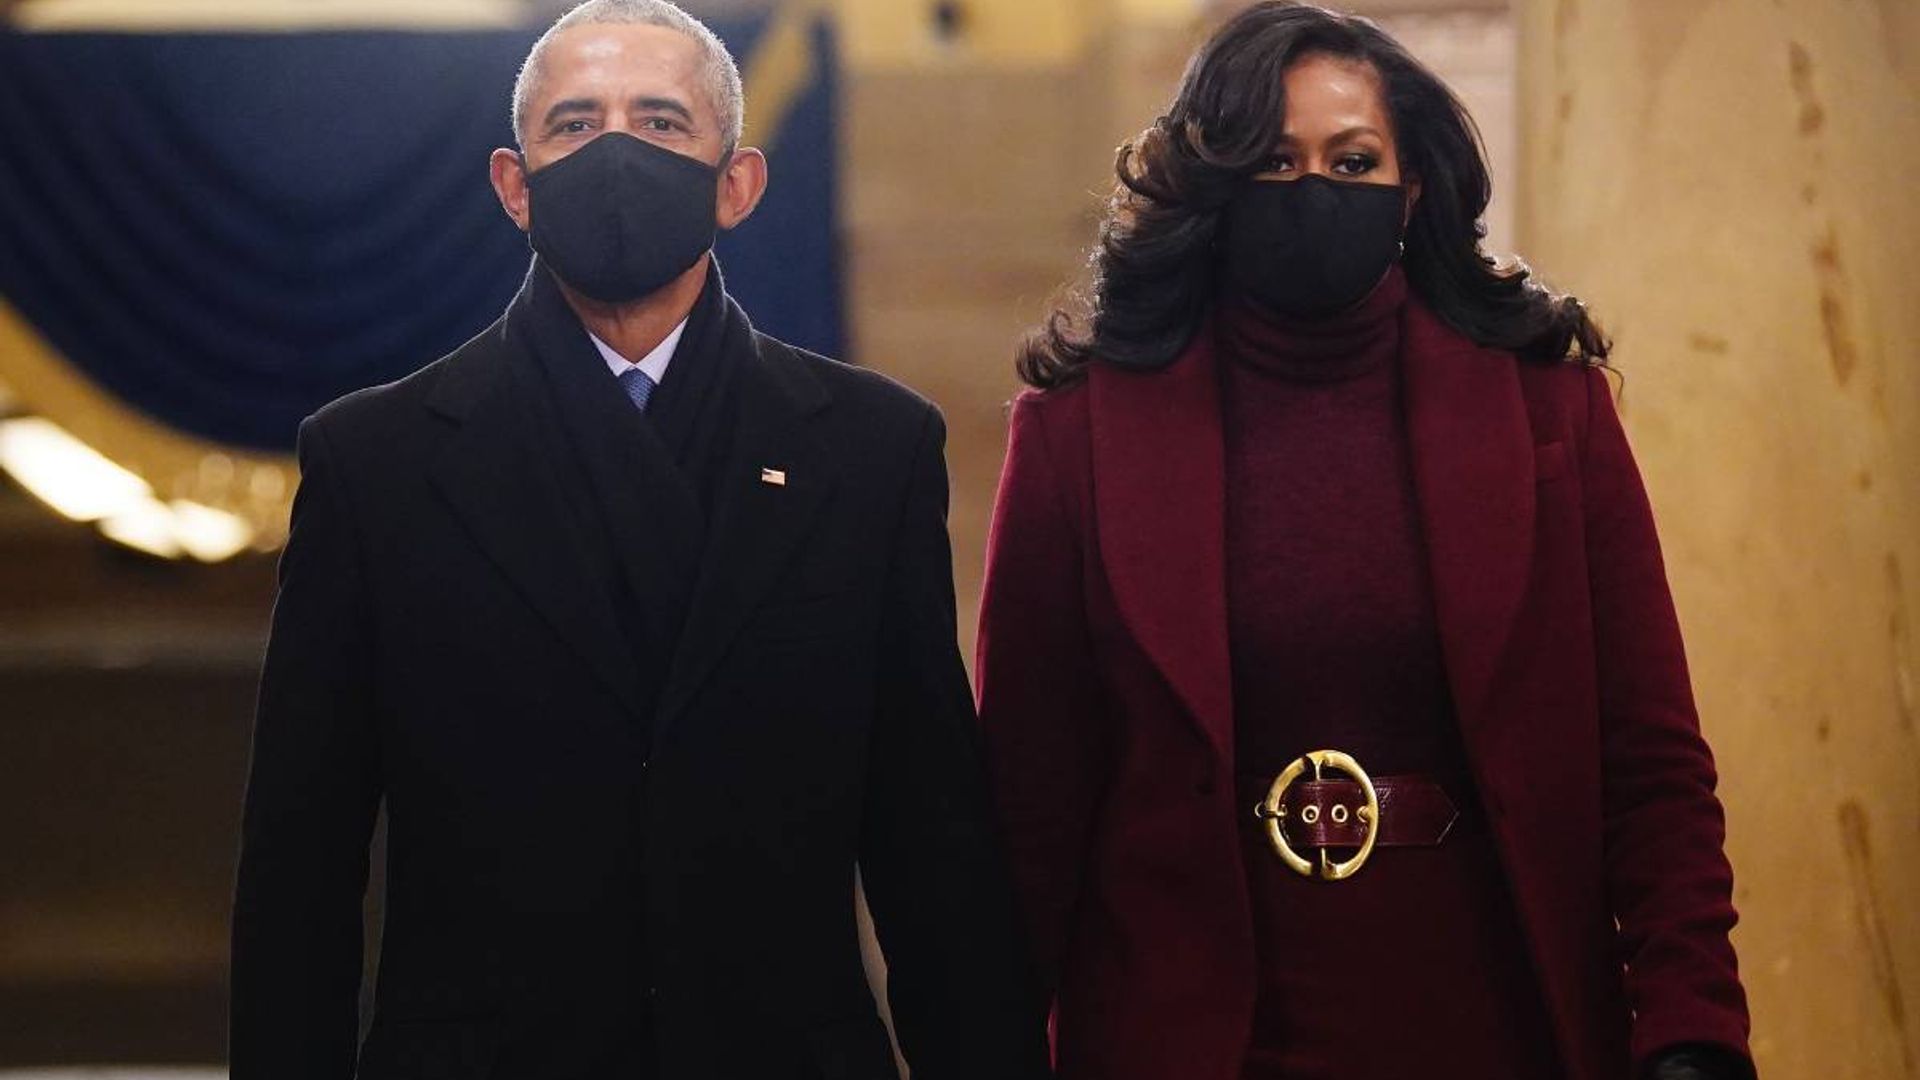 Michelle Obama‘s inauguration outfit was incredibly meaningful - find out why